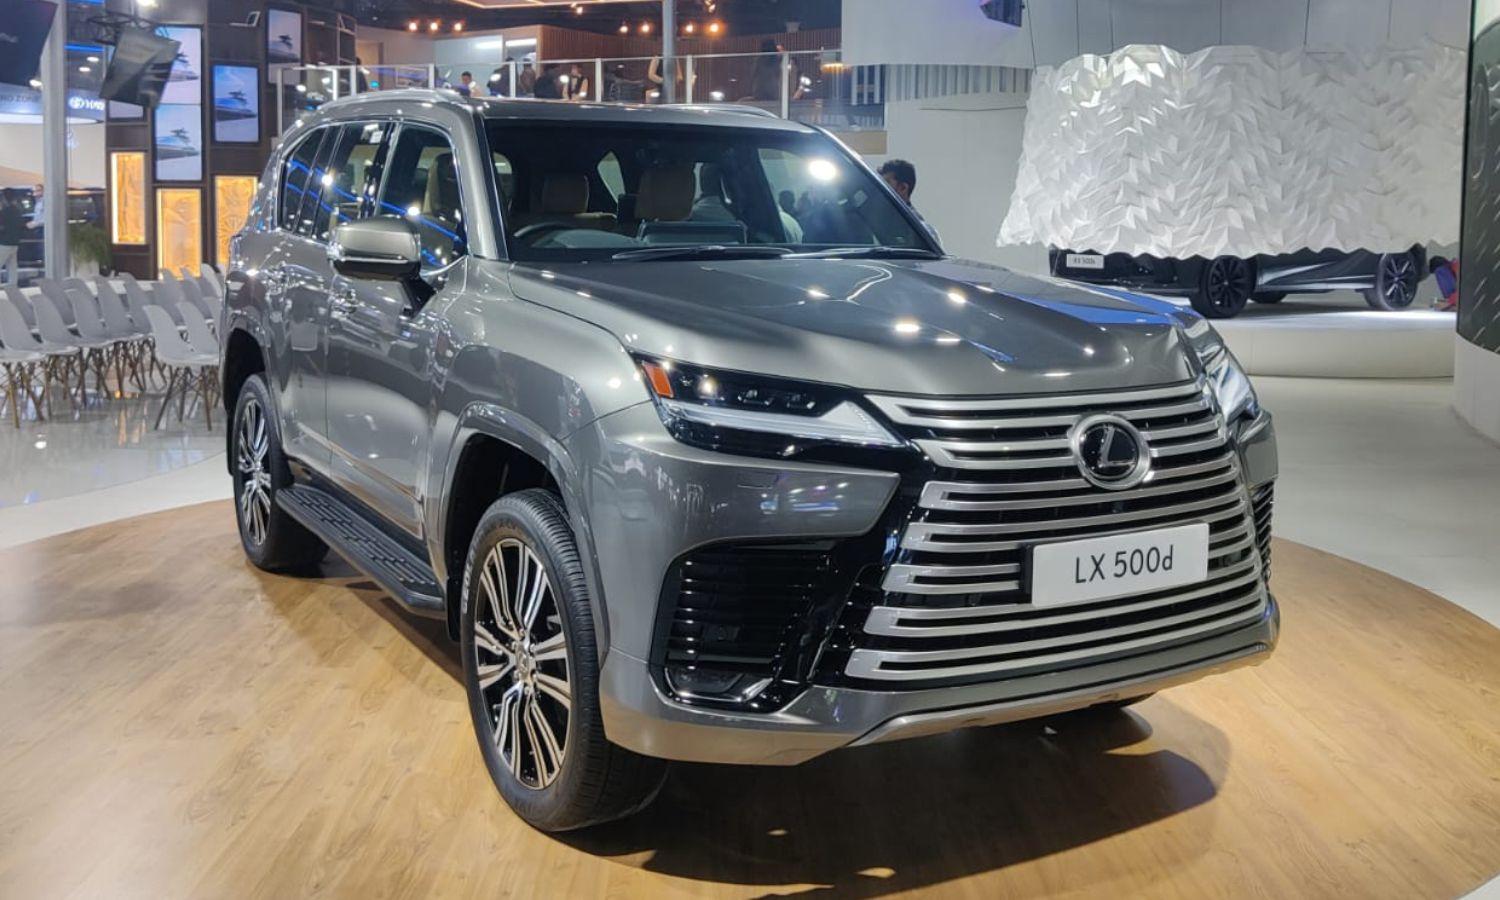 Lexus has already announced the price of the Lexus LX, which will be offered in only one variant - LX 500d, and it comes with a sticker price of Rs. 2.82 crore (ex-showroom, India).